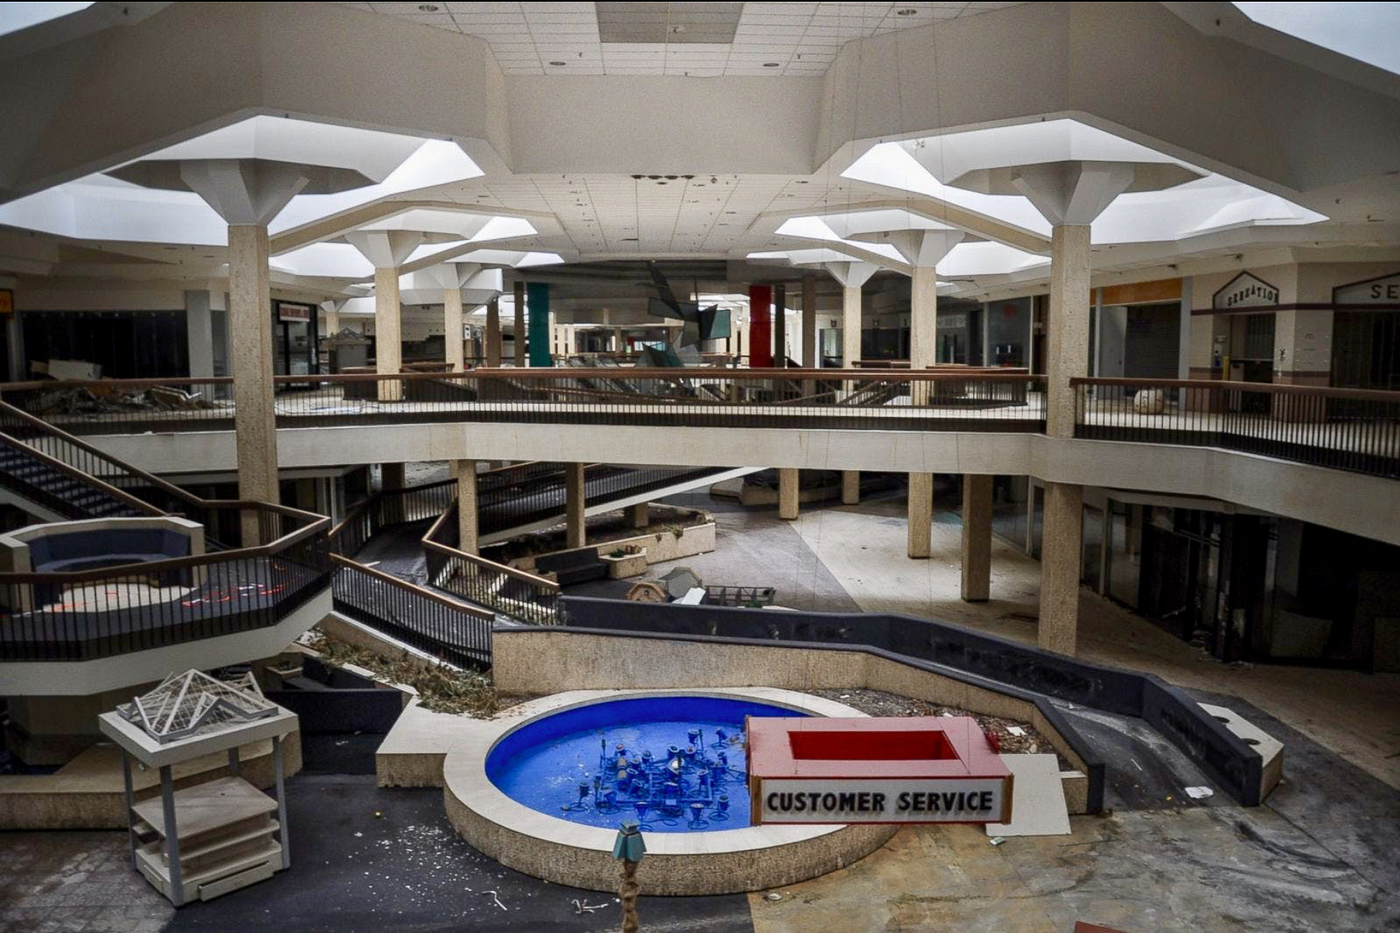 Dying Malls? This One Has Found a Way to Thrive - The New York Times